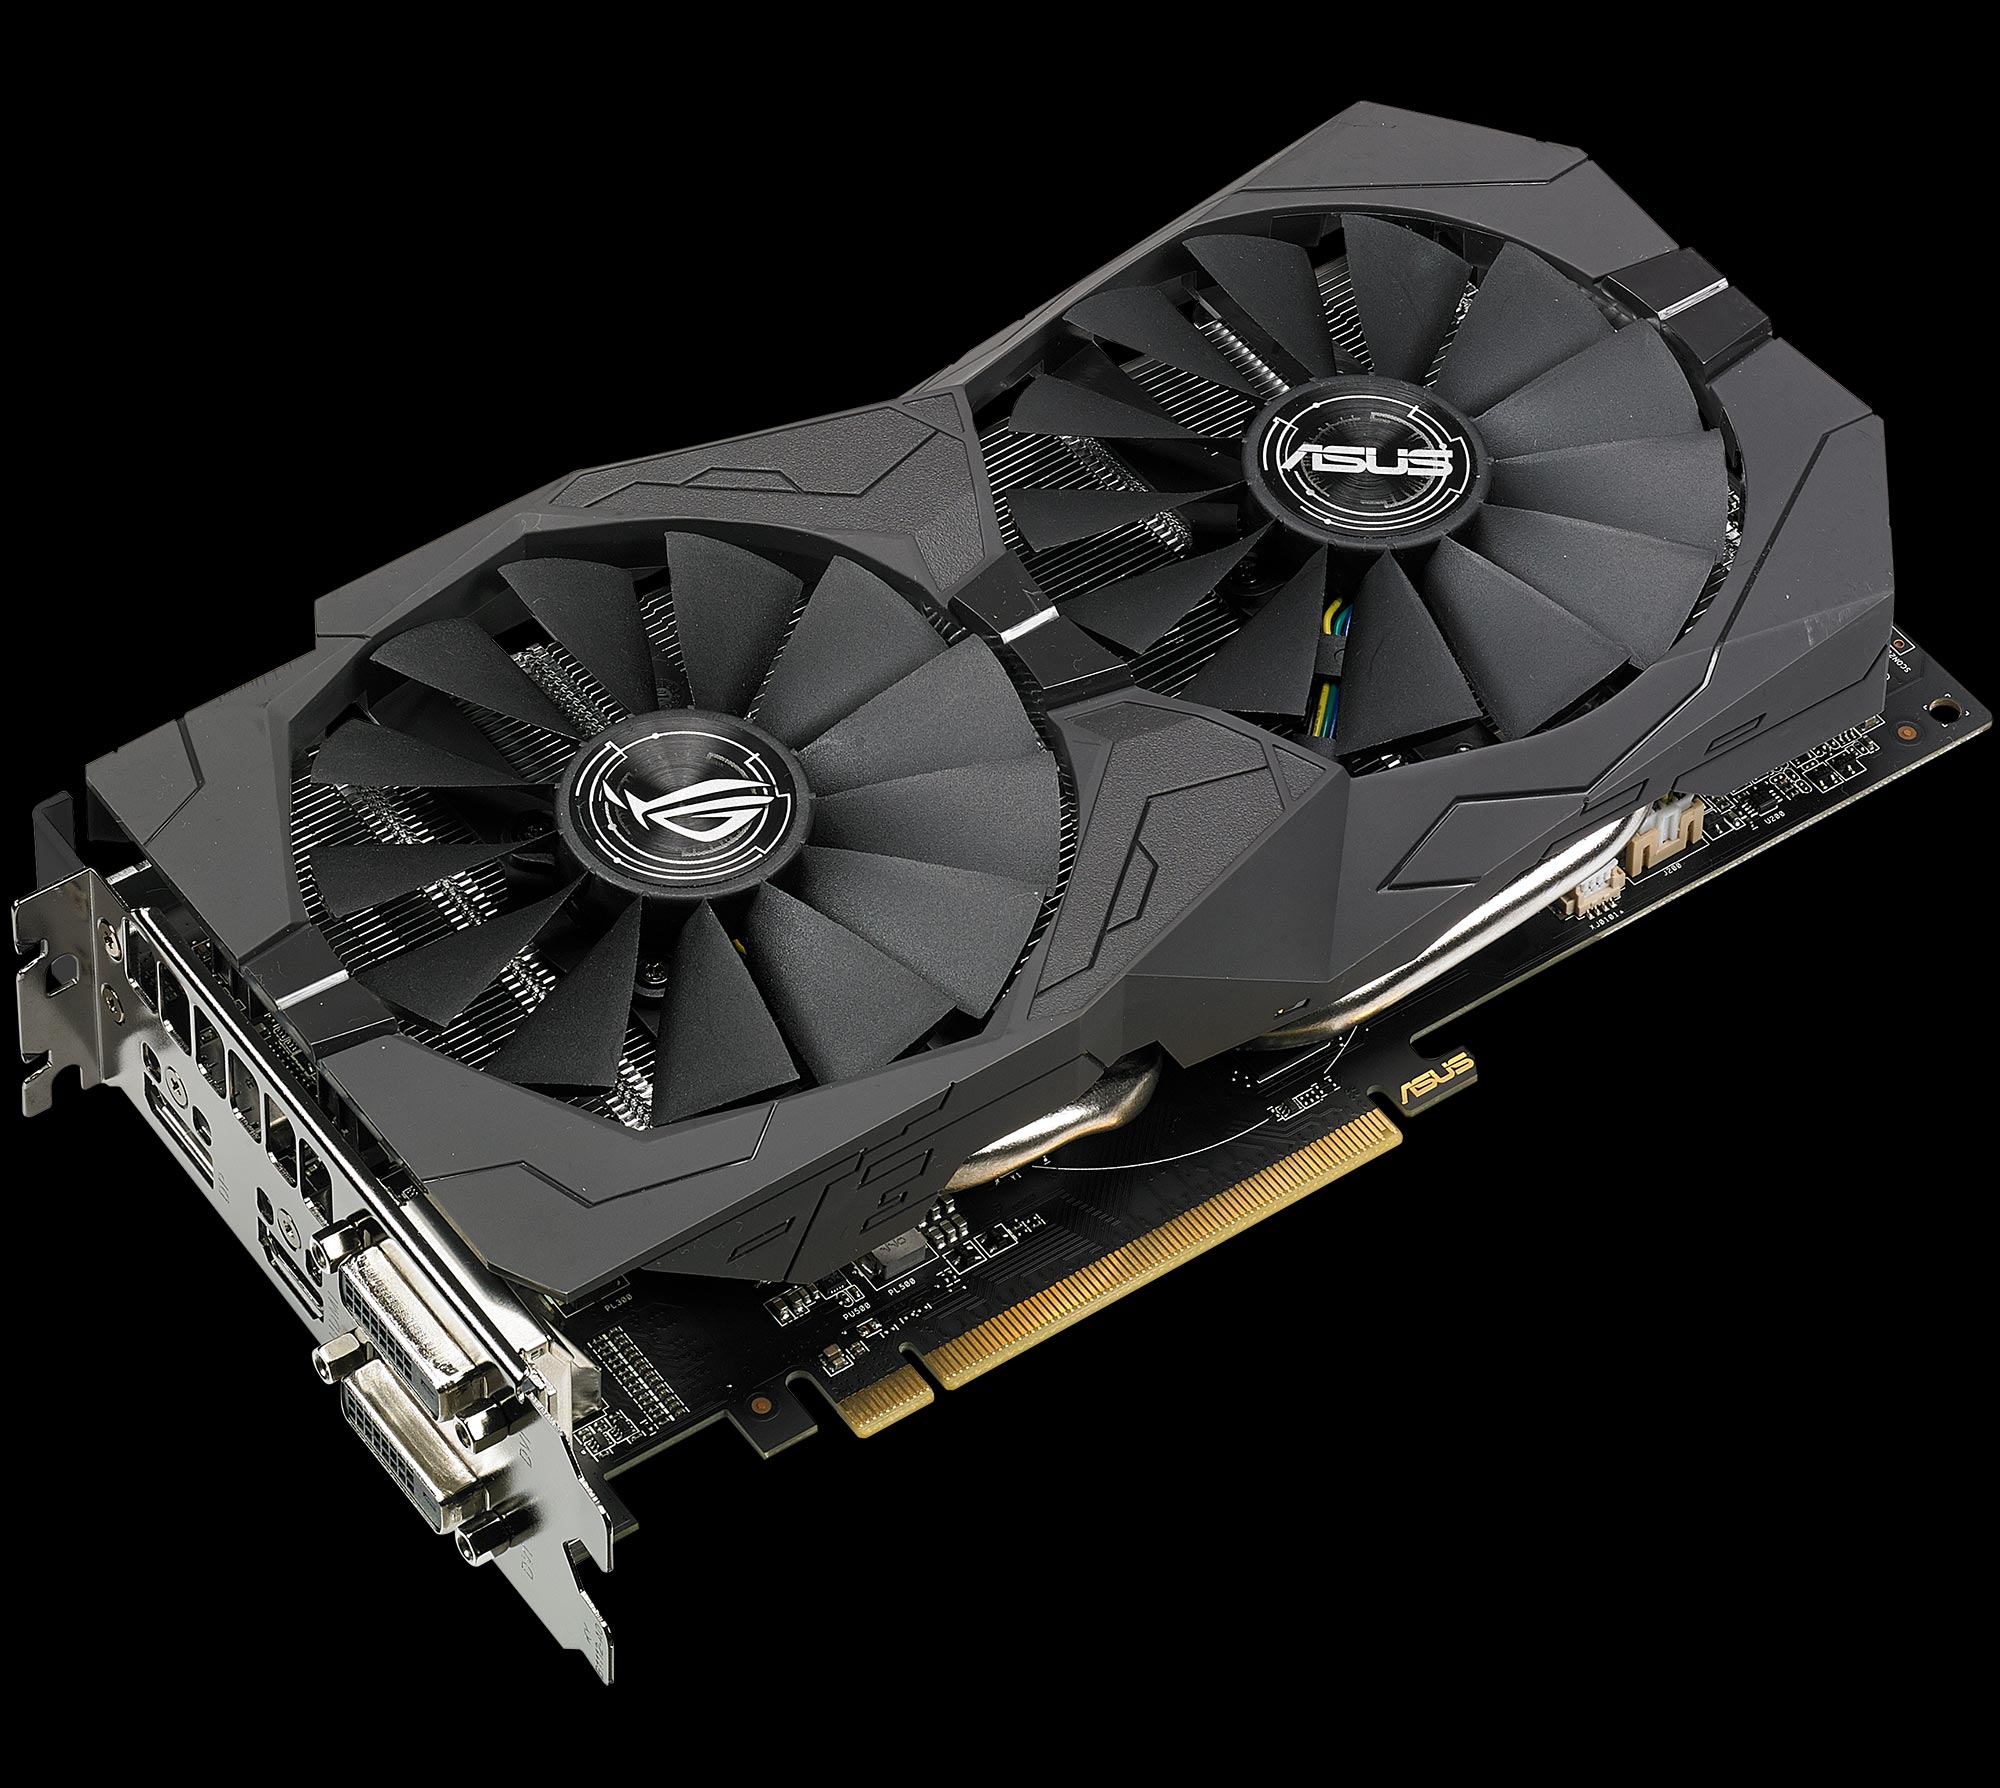 Introducing the ROG Strix Radeon RX 580 and 570 graphics cards | ROG -  Republic of Gamers Global